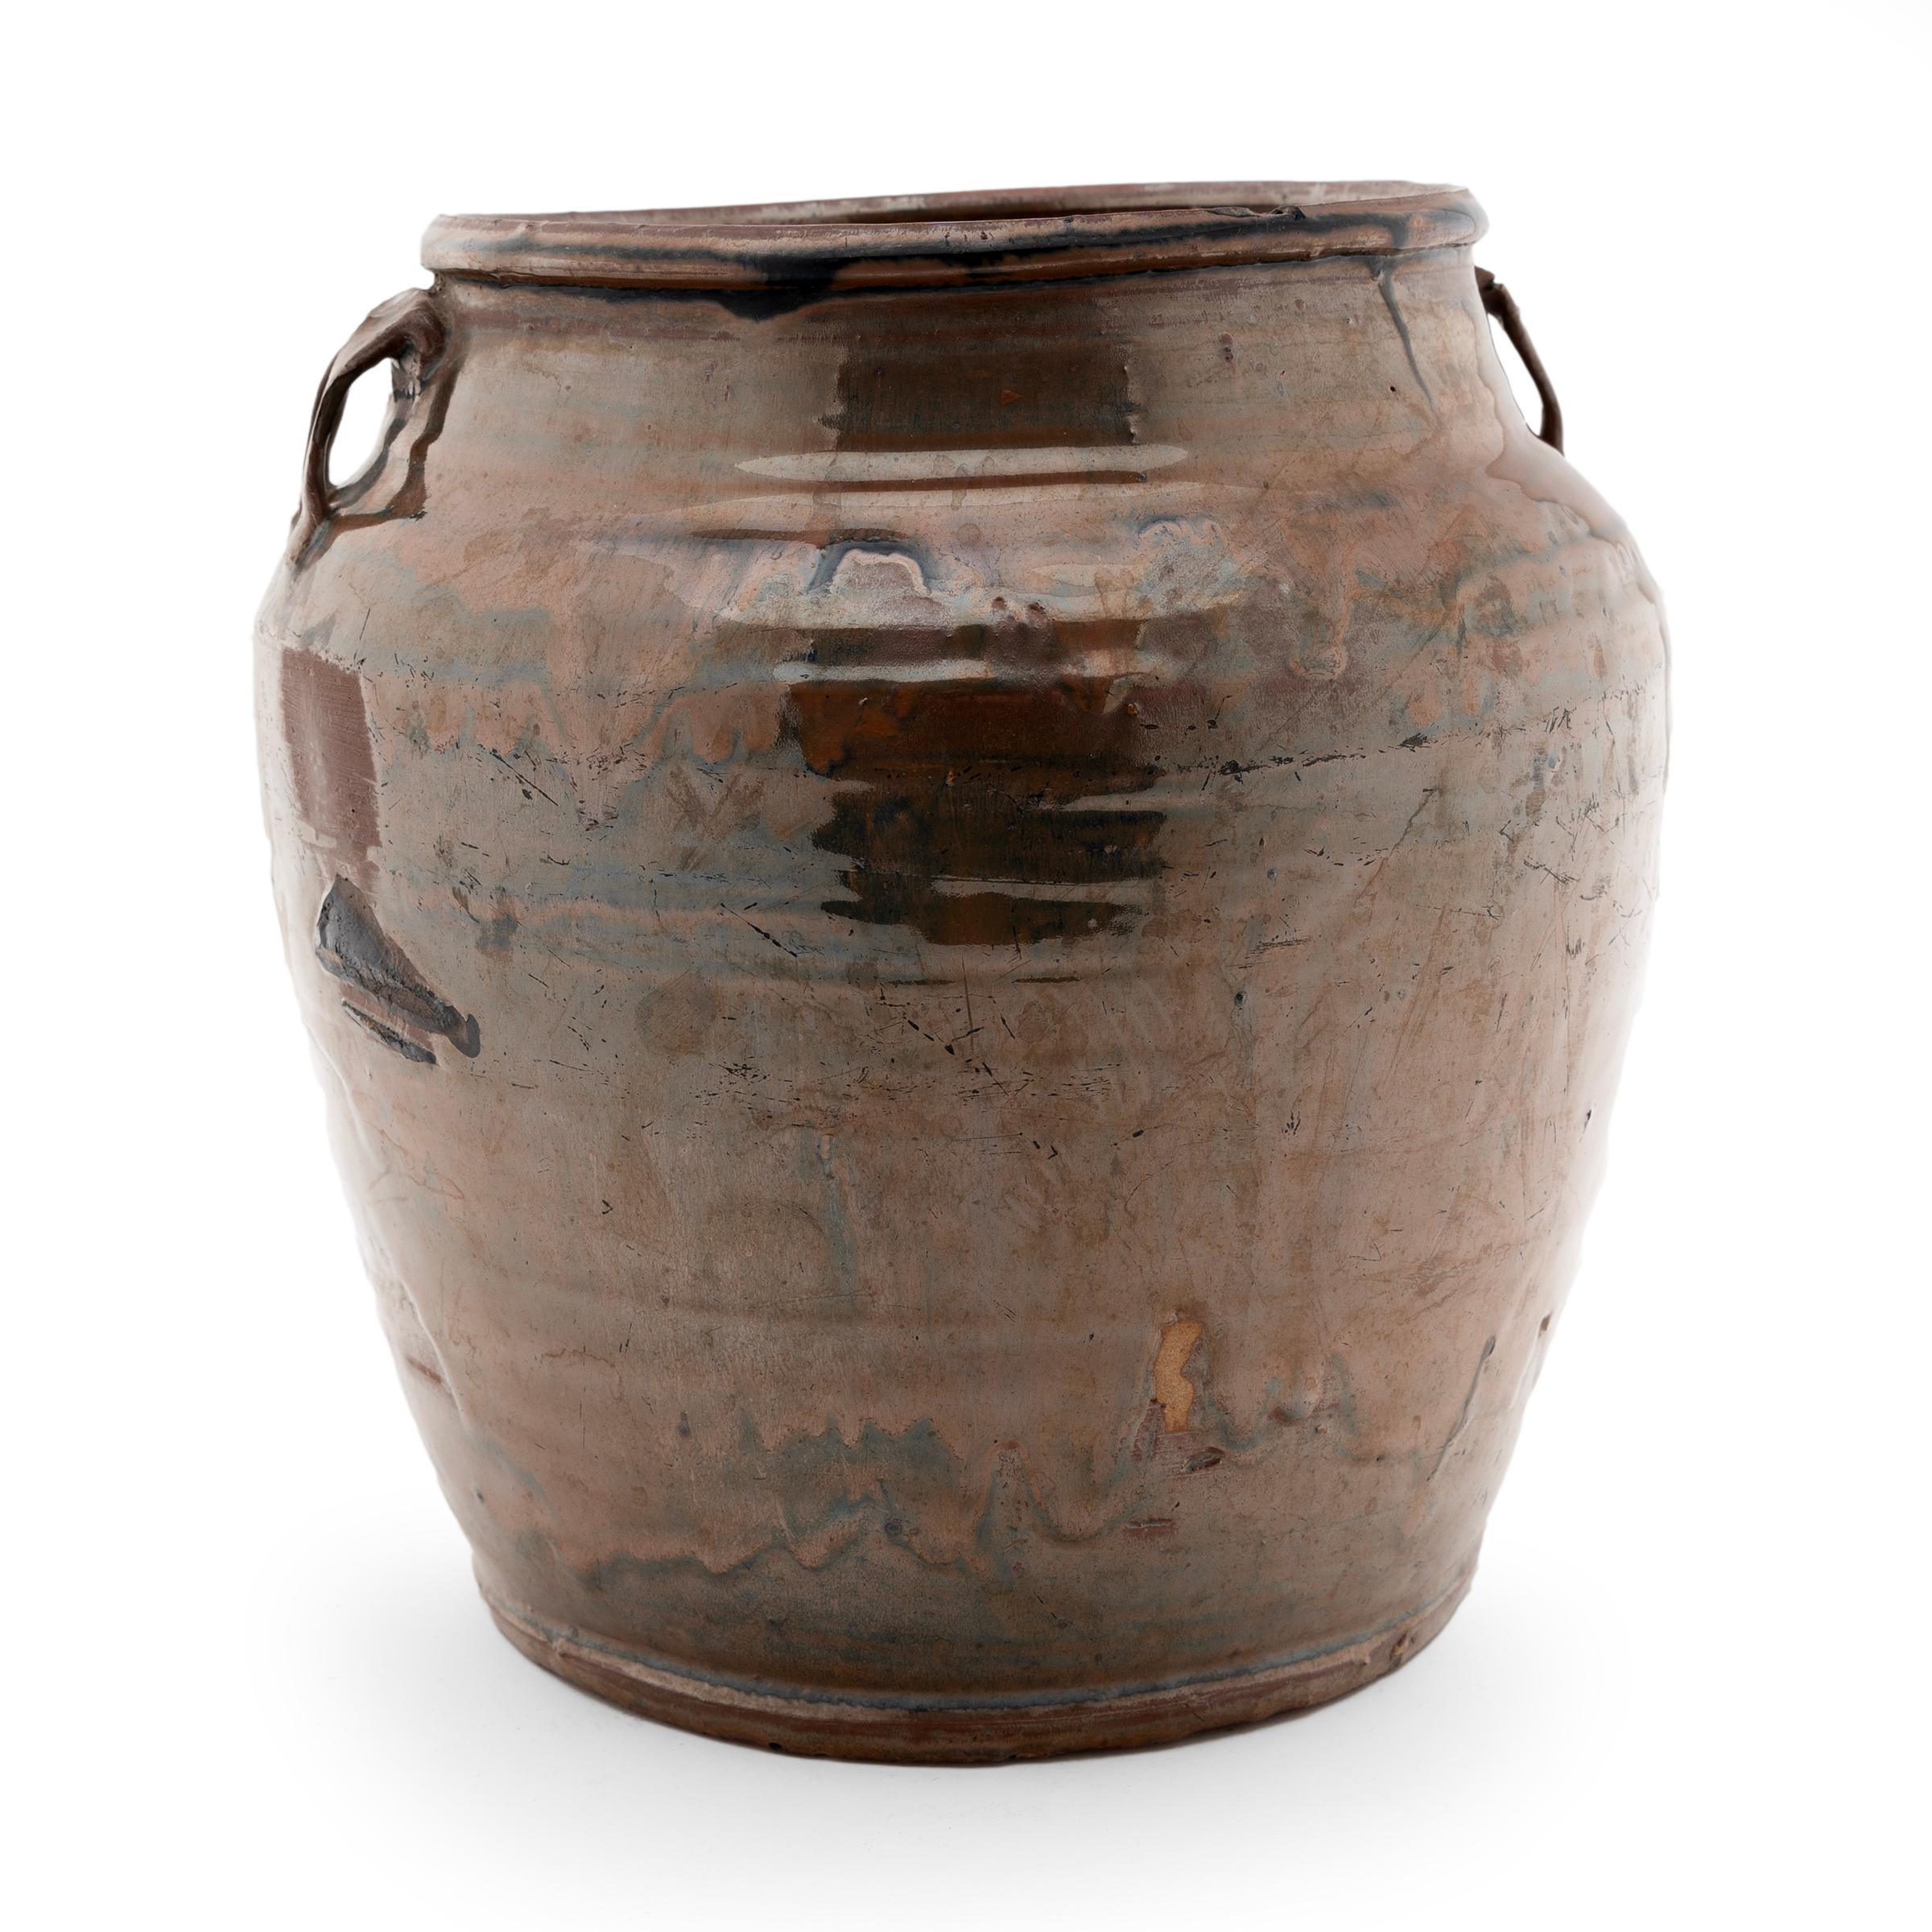 Coated inside and out with a rich drip glaze, this early 20th century jar was originally used for storing foods and condiments in a Provincial Chinese kitchen. The wide-mouth jar has a slightly tapered form with rounded shoulders, two